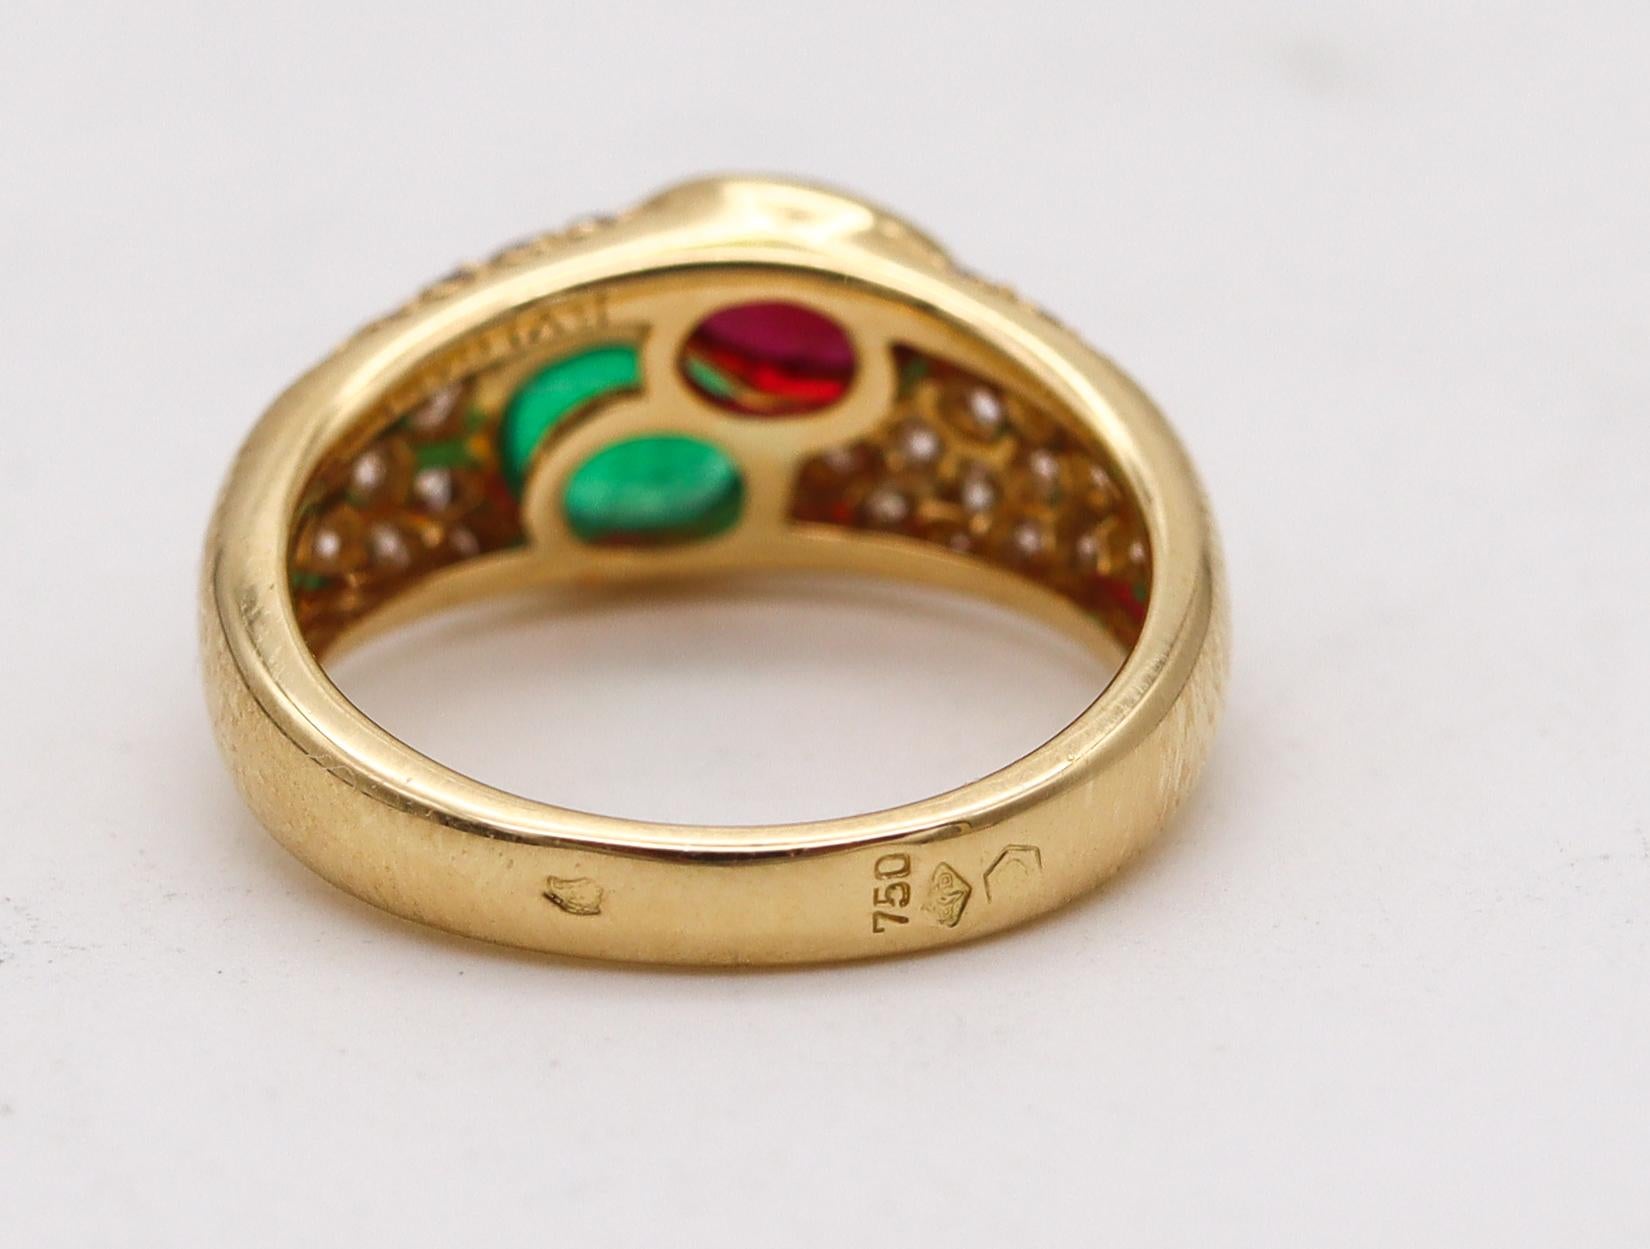 Brilliant Cut Bvlgari France Doppio Ring in 18kt Gold with 2.74 Ctw in Diamonds Emerald & Ruby For Sale